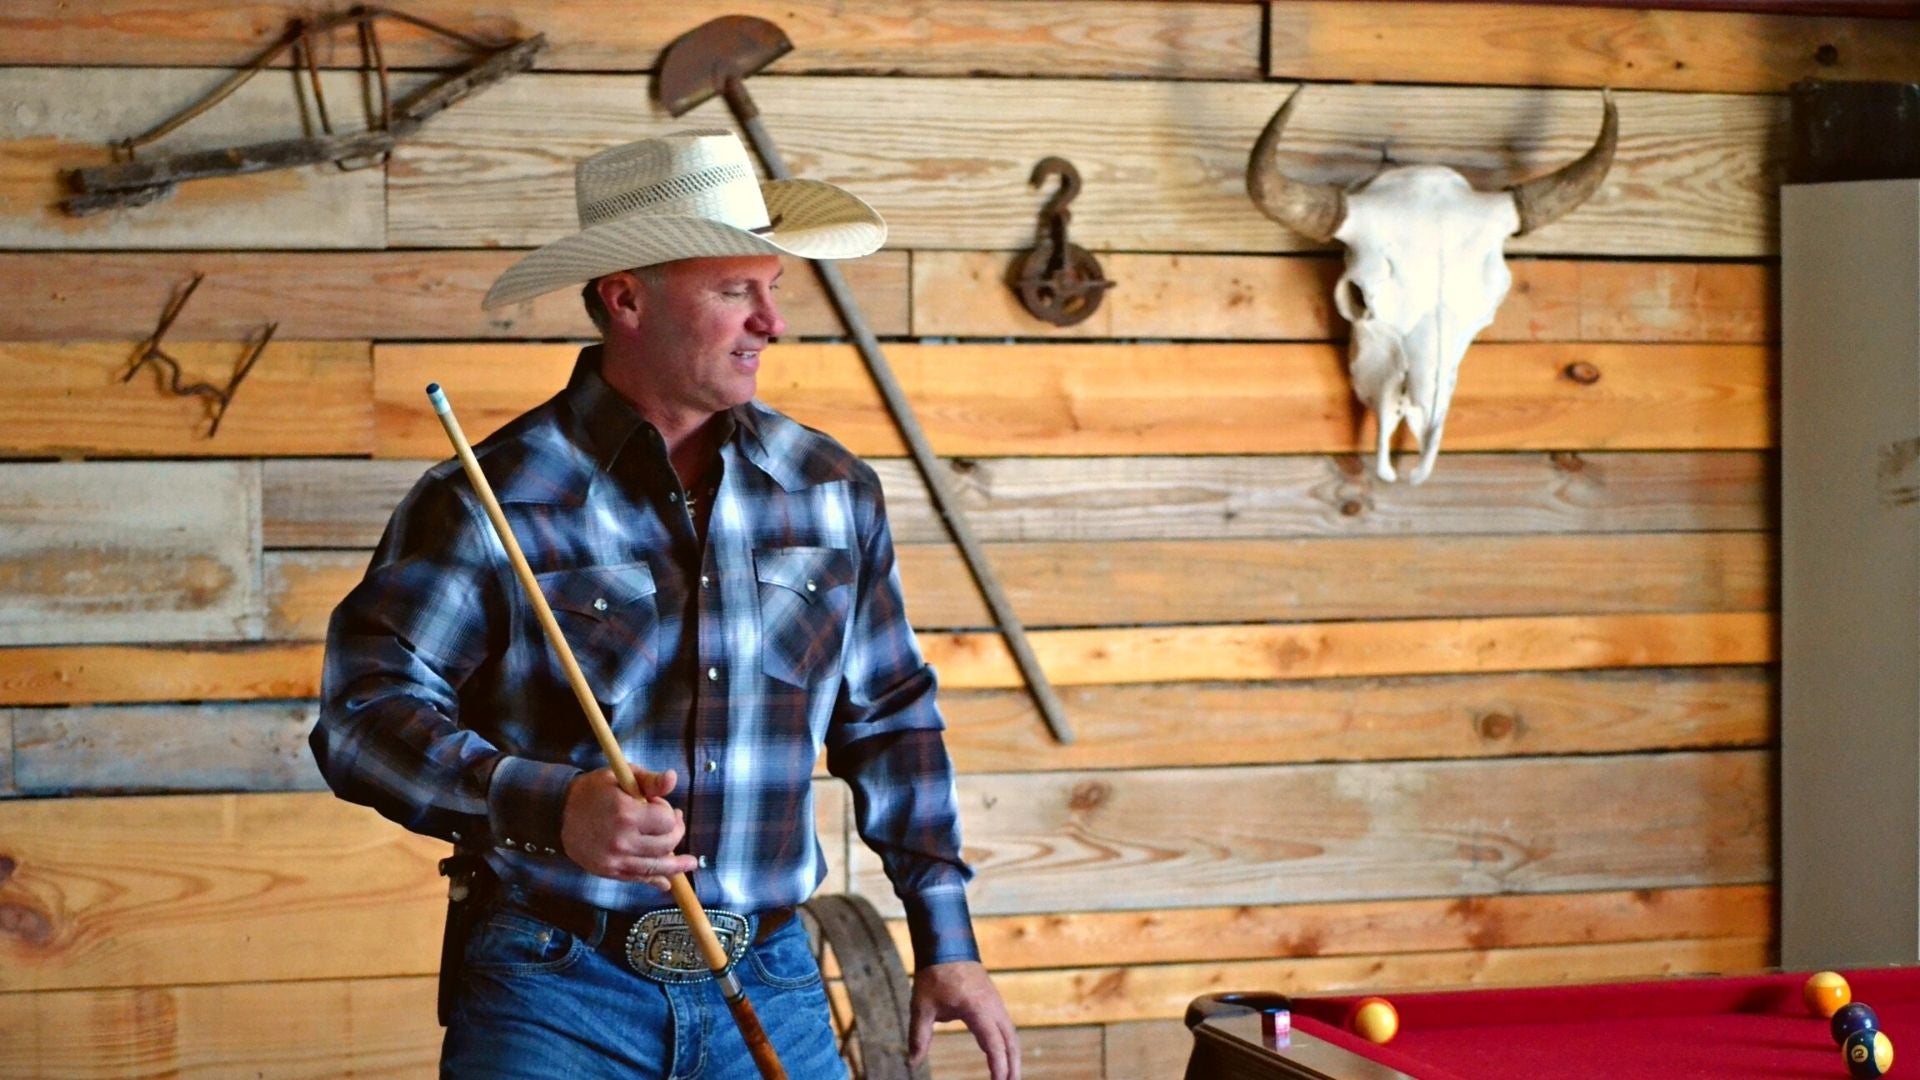 Rodeo Clothing Retail Store | Western Apparel | RodeoClothing Store